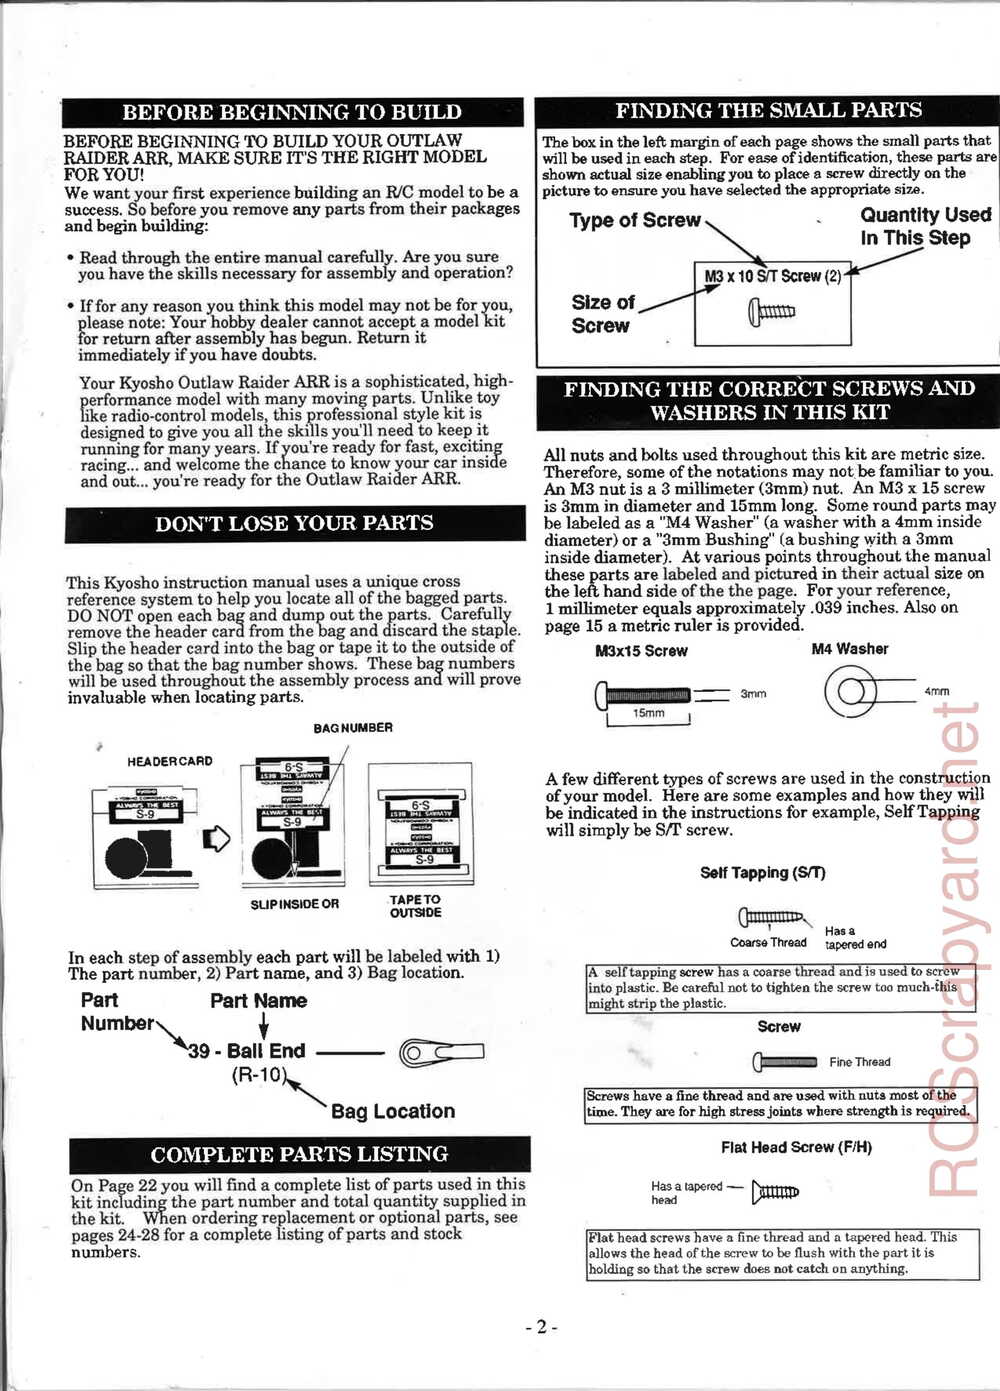 Kyosho - 3162H - Outlaw-Raider ARR - Manual - Page 02